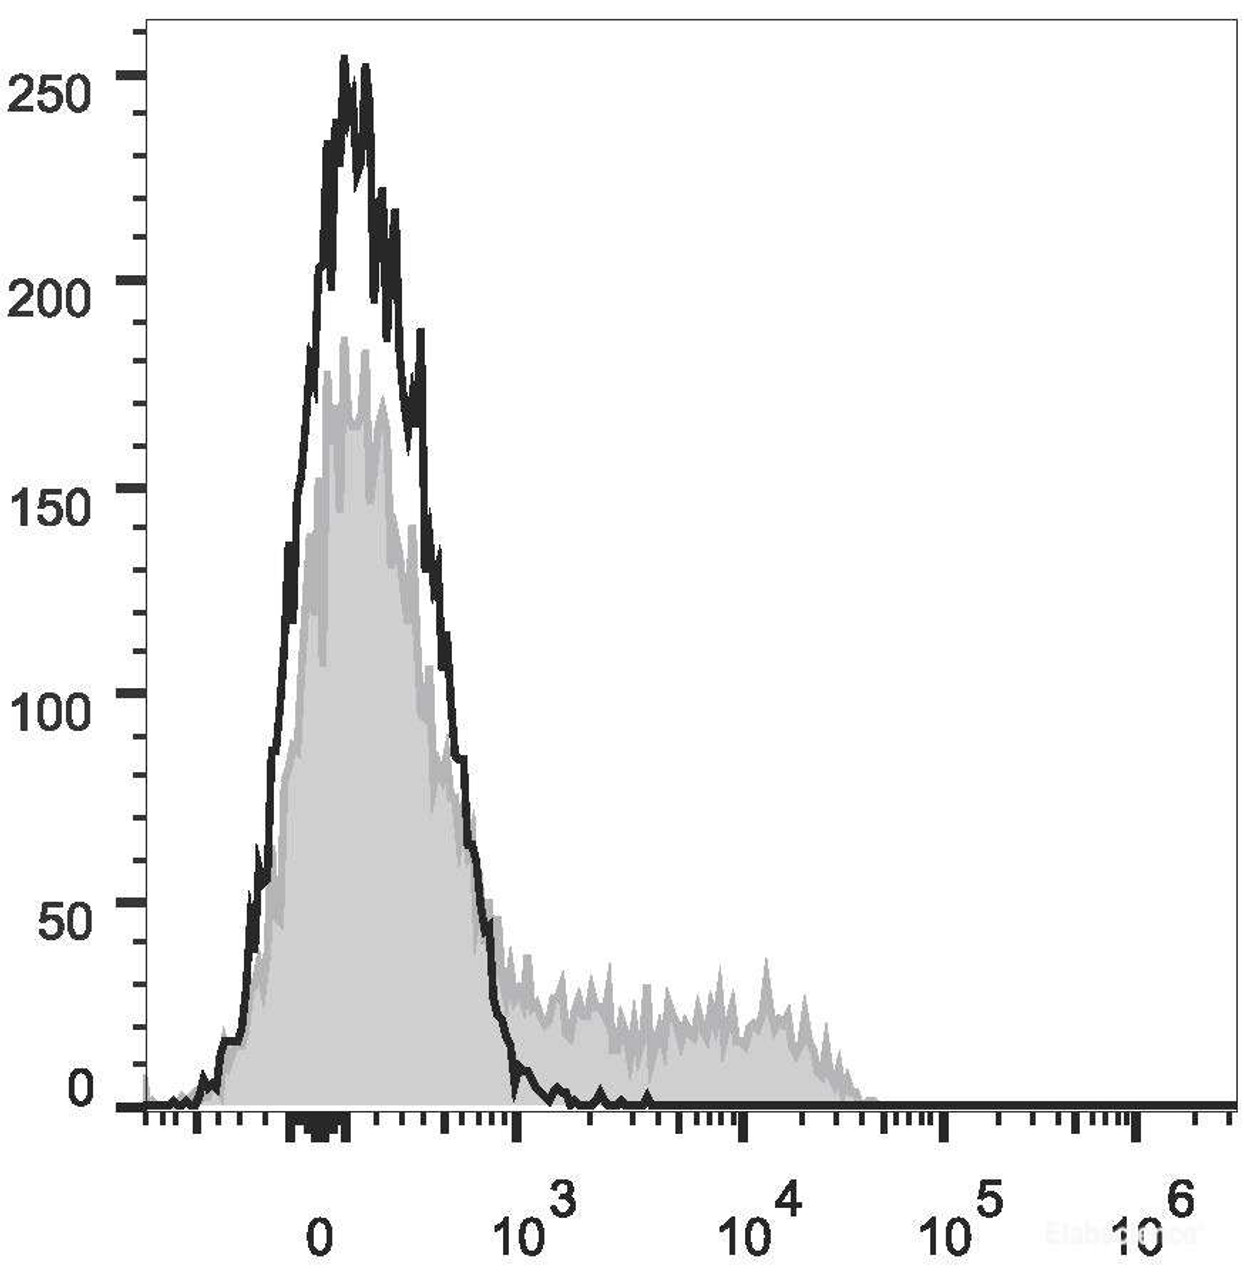 Human peripheral blood lymphocytes are stained with Anti-Human CD16 Monoclonal Antibody(PE/Cyanine7 Conjugated)(filled gray histogram). Unstained lymphocytes (empty black histogram) are used as control.